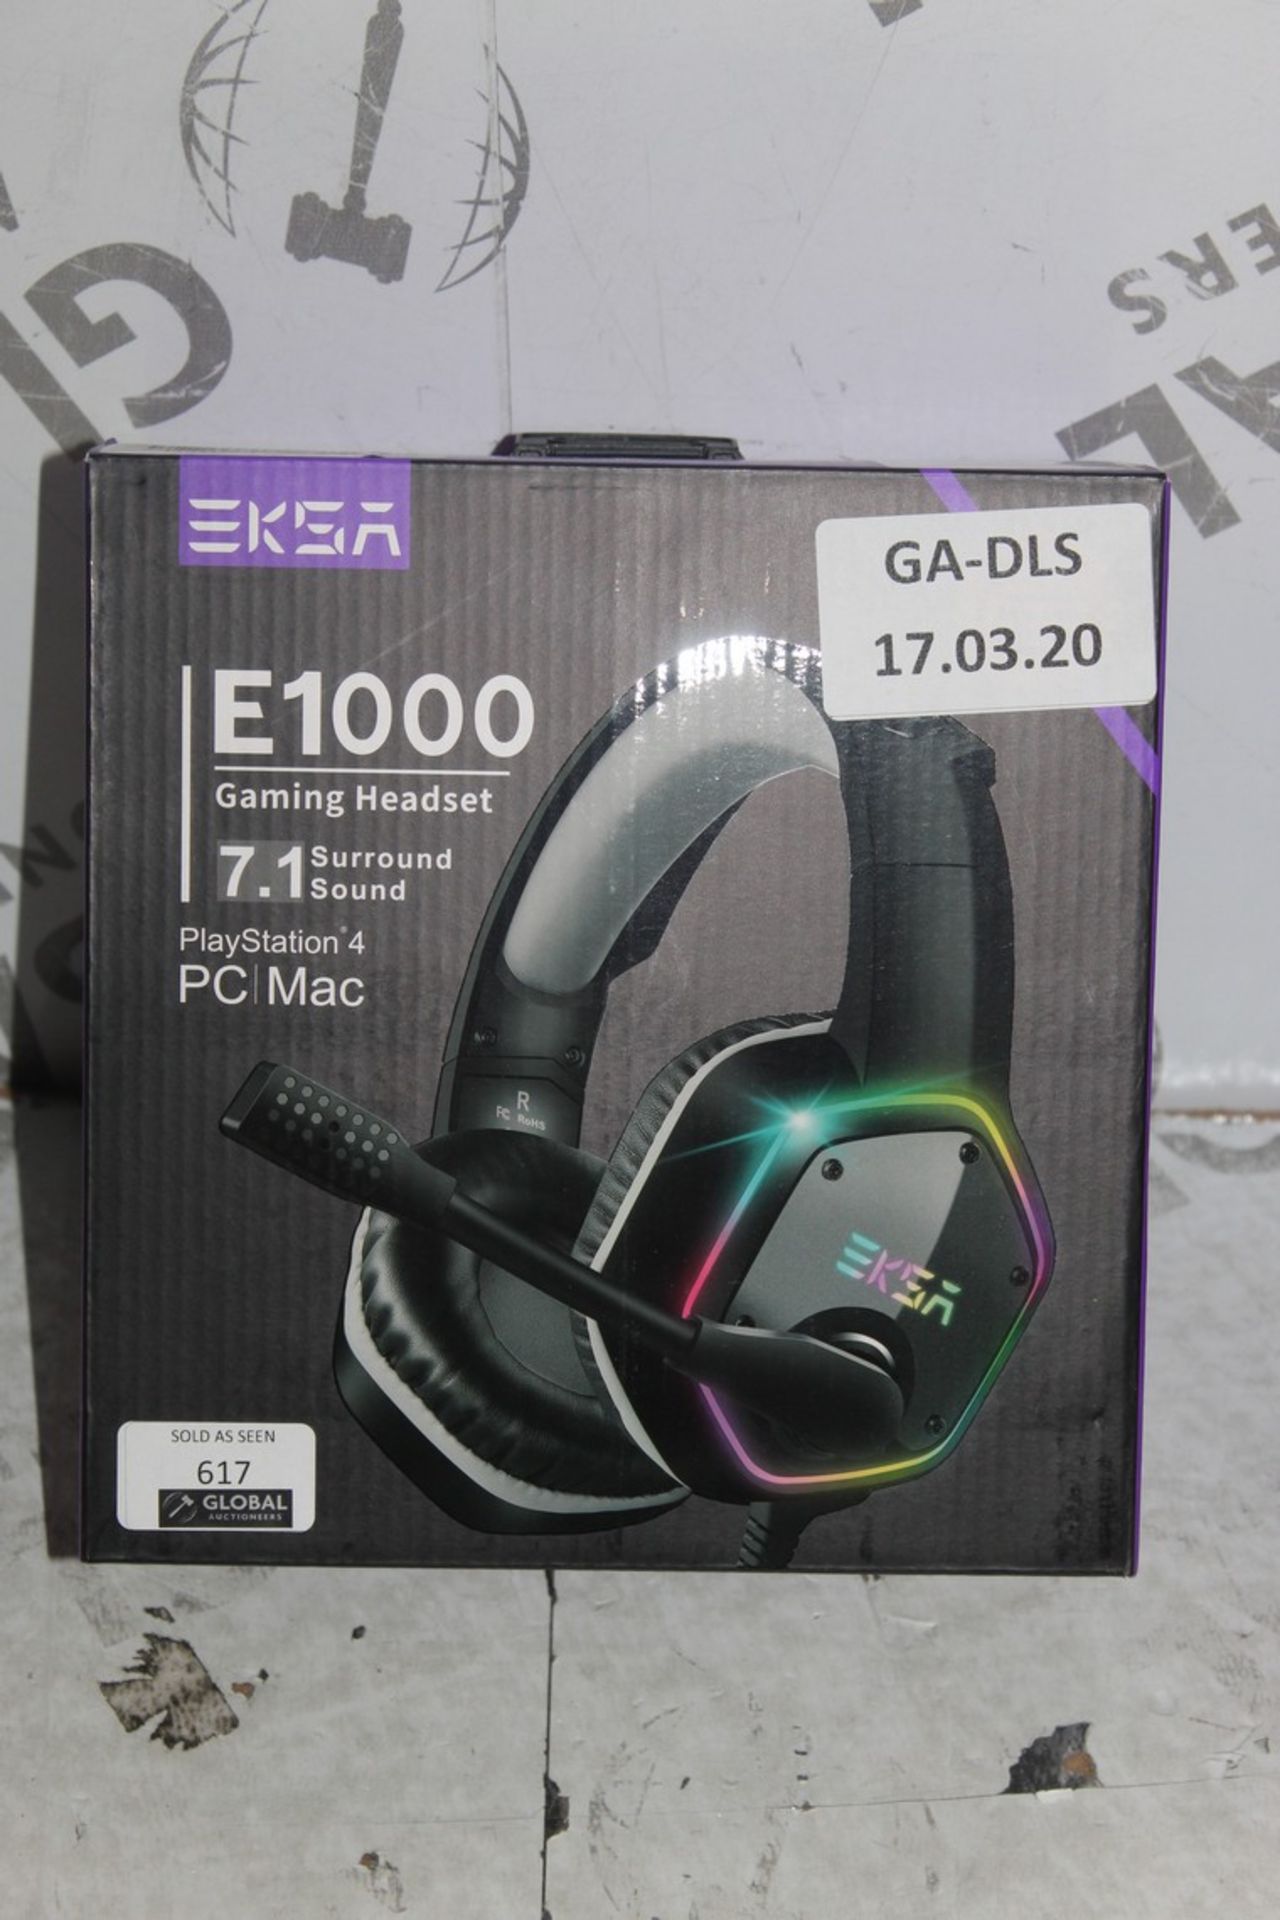 Boxed EKSAE1000 Gaming Head Sets RRP £60 (Pictures Are For Illustration Purposes Only) (Appraisals